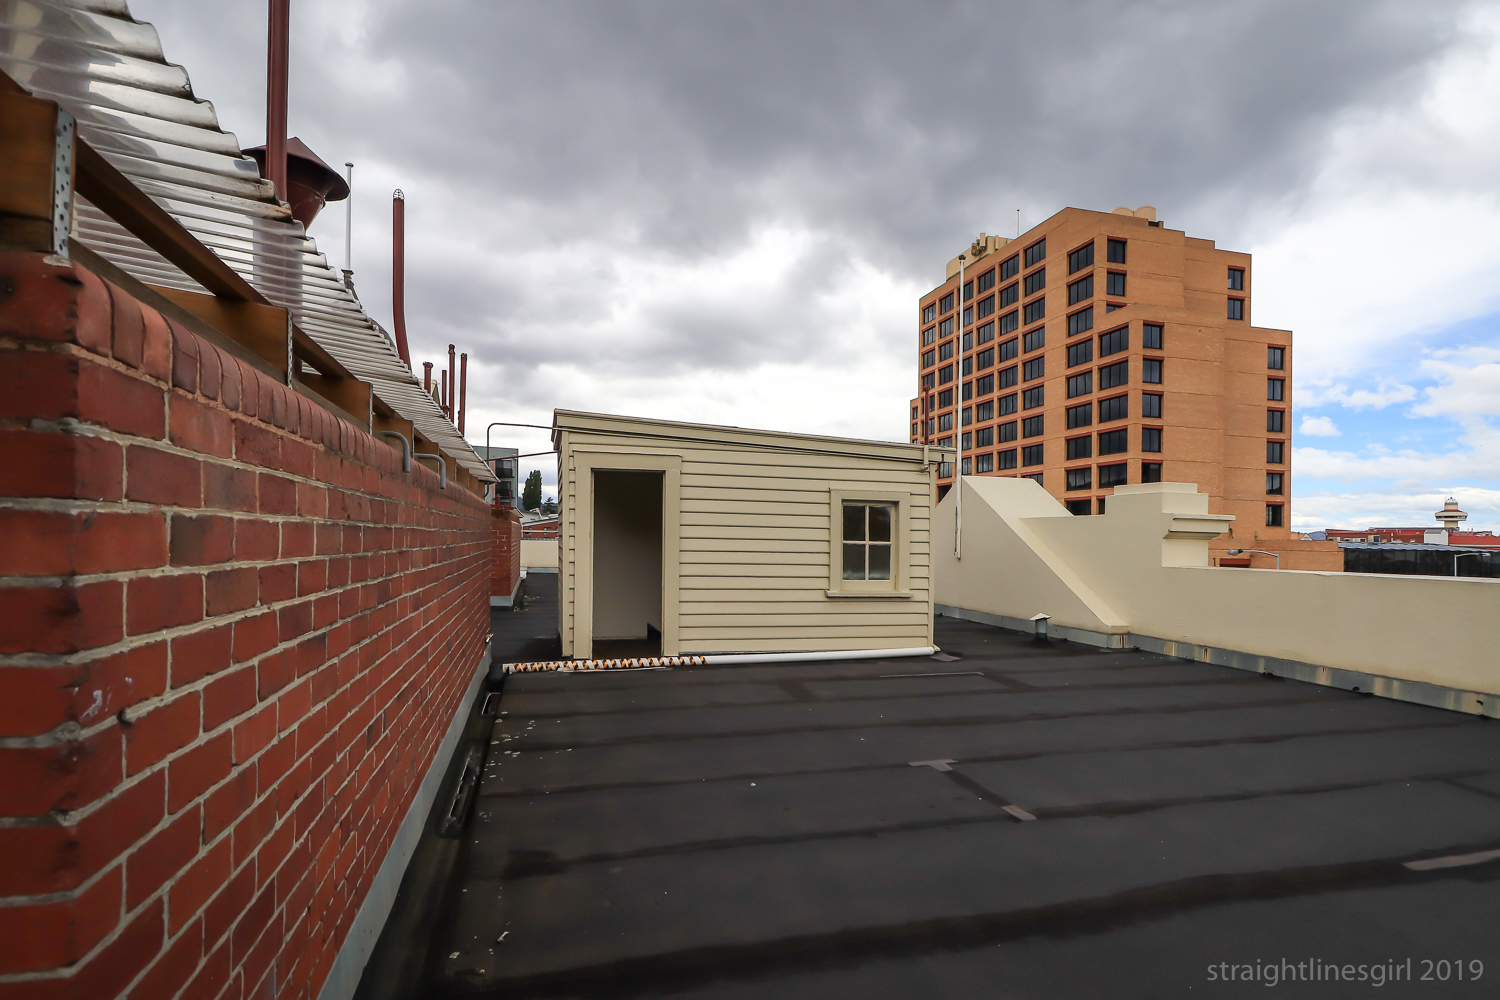 20191109 OHH-087 City Hall Roof